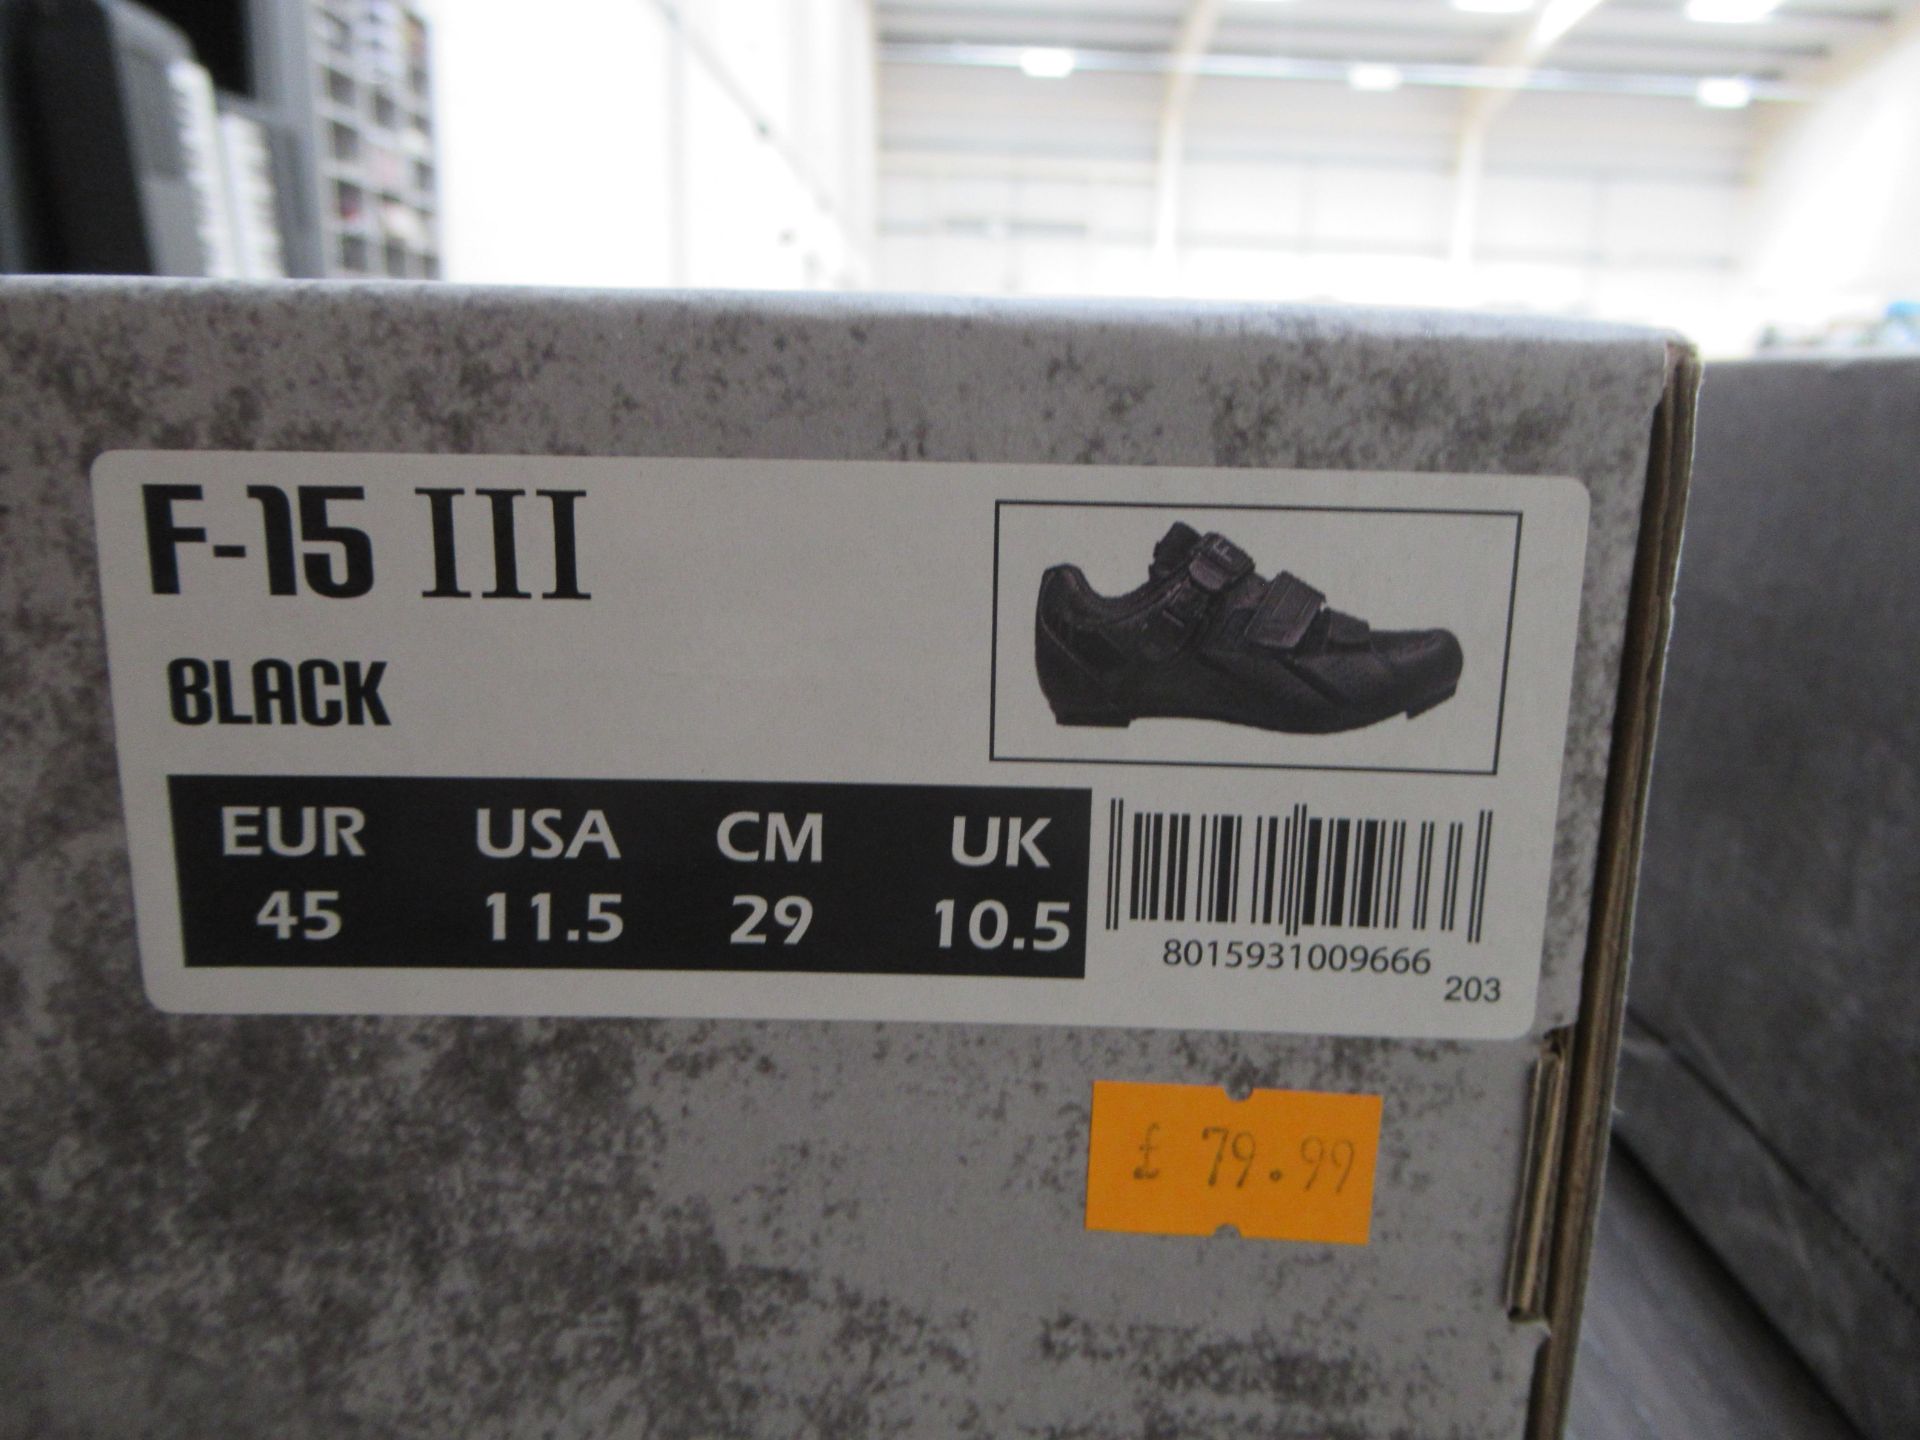 2 x Pairs of FLR cycling shoes - 1 x F-35 III boxed EU size 45 (RRP££64.99) and 1 x F-15 III boxed E - Image 5 of 7